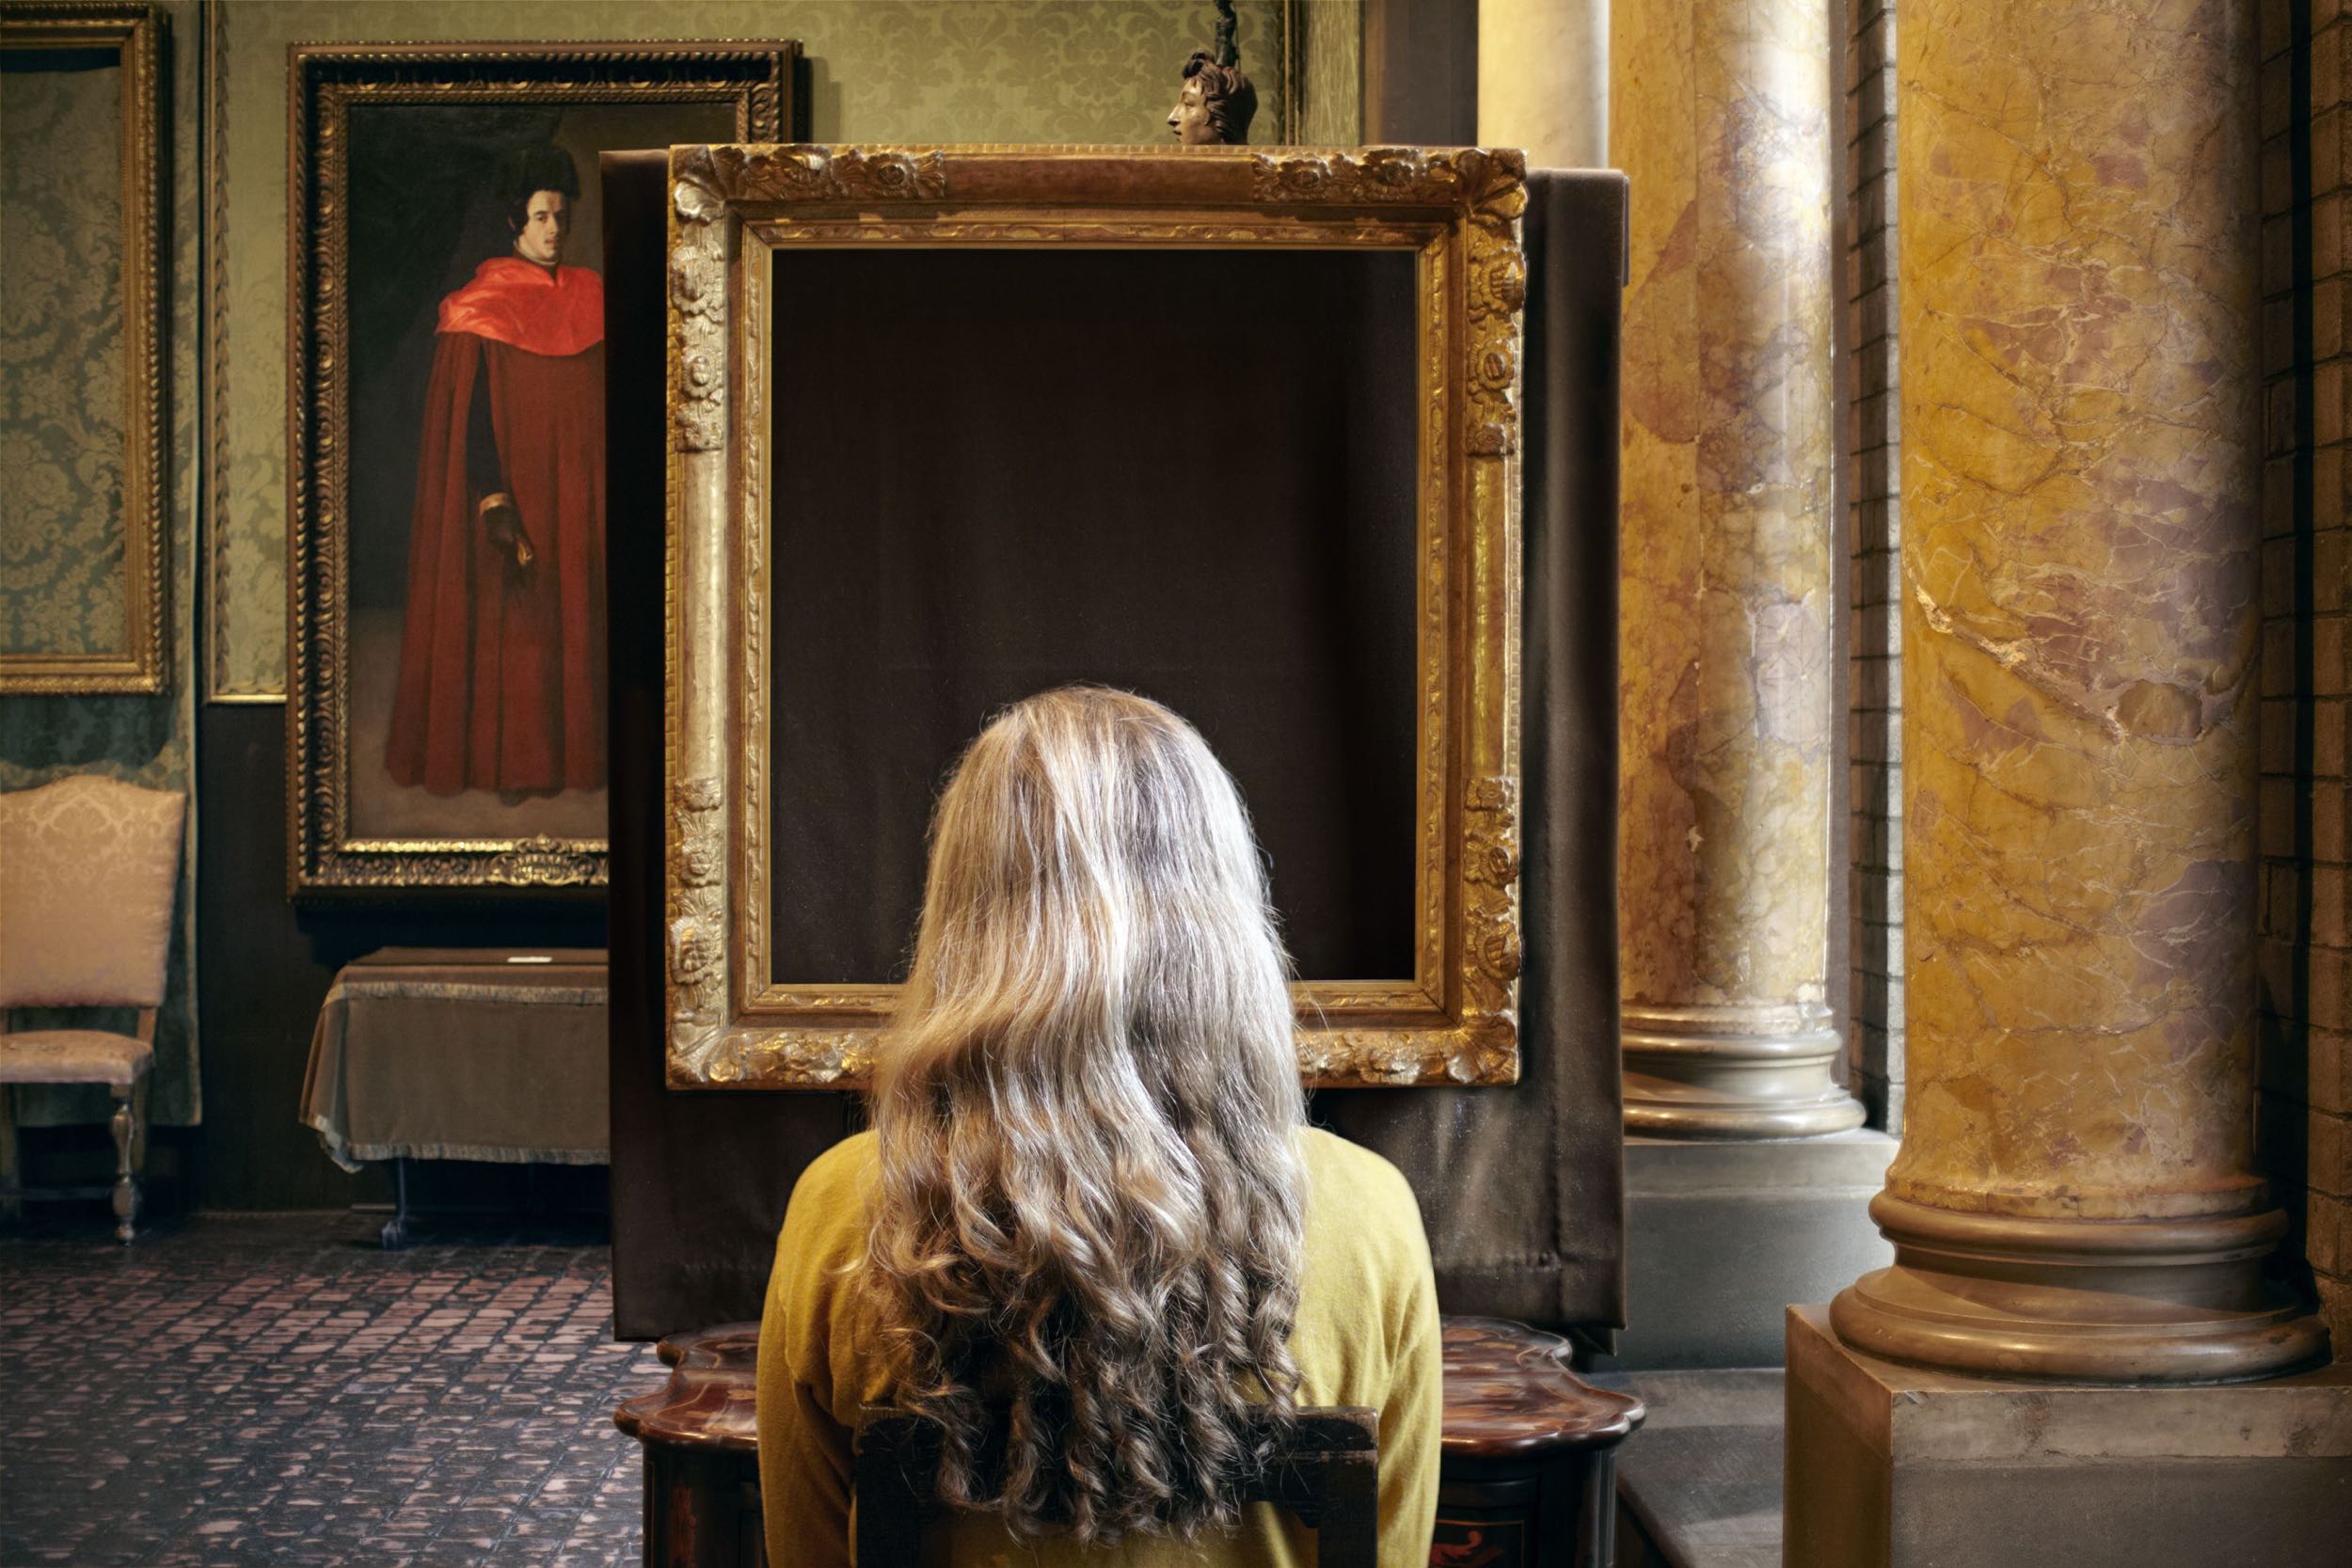 Sophie Calle. Que voyez-vous ? Le concert. Vermeer [What do you see ? The Concert. Vermeer, 2013 (detail) © Sophie Calle/ADAGP, Paris, 2015. Courtesy Galerie Perrotin and Paula Cooper Gallery